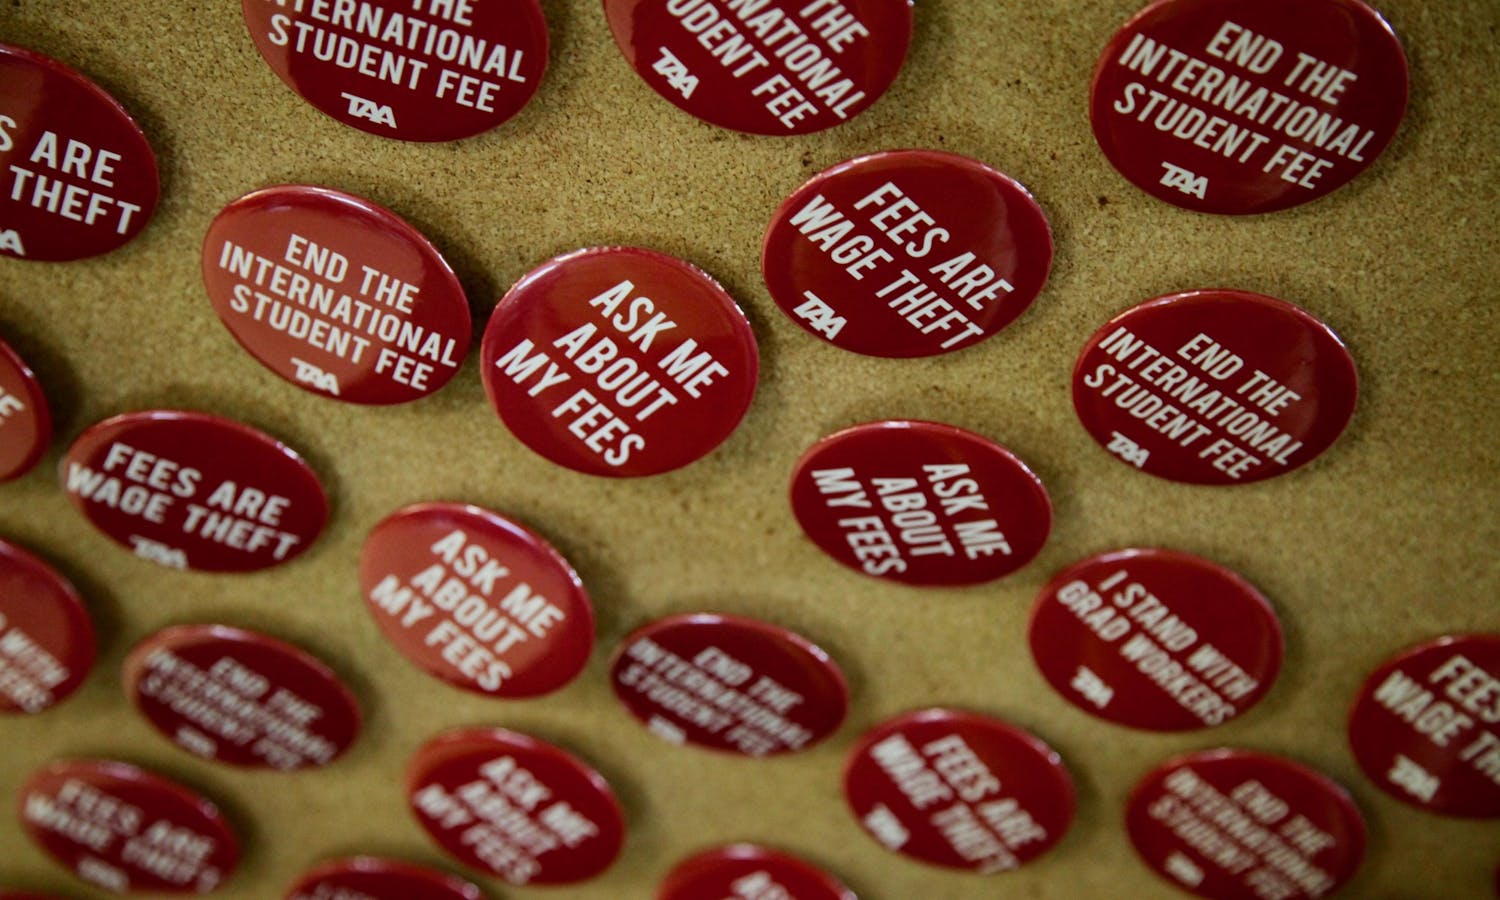 Photo of buttons which say "ask me about my fees" and "end the international student fee".